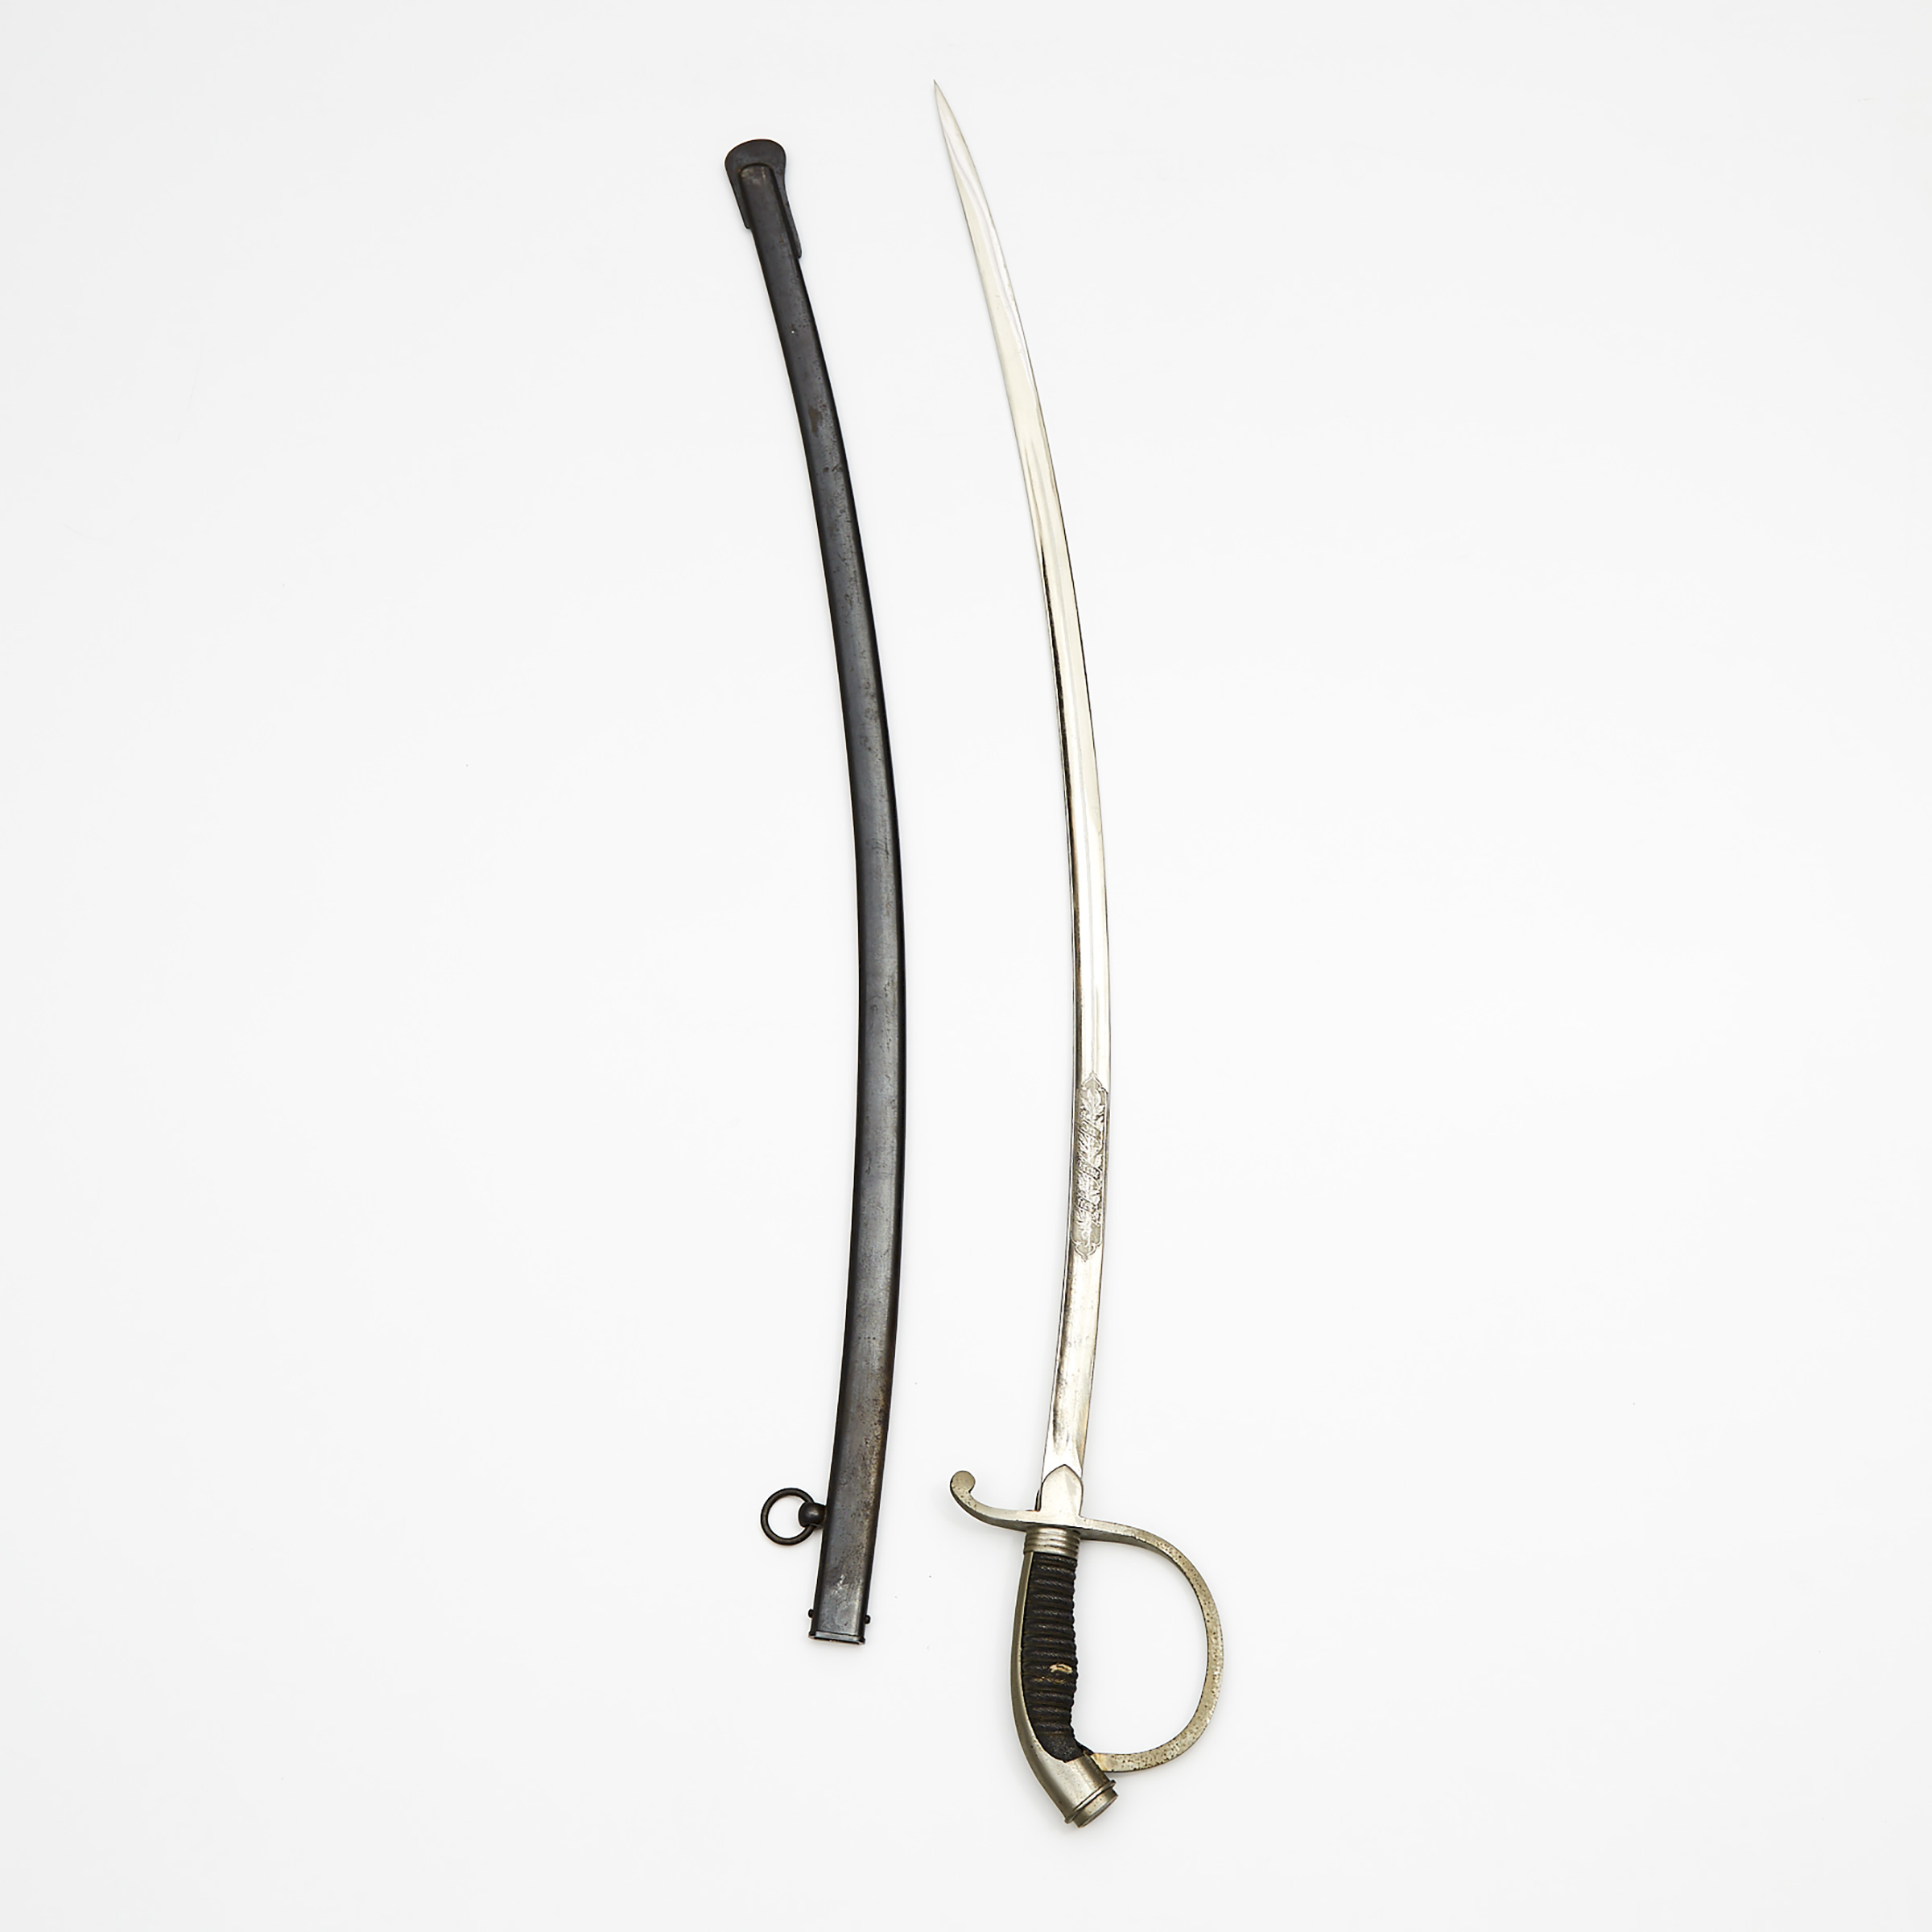 Bavarian Imperial Cavalry Officer's Sabre, 19th century